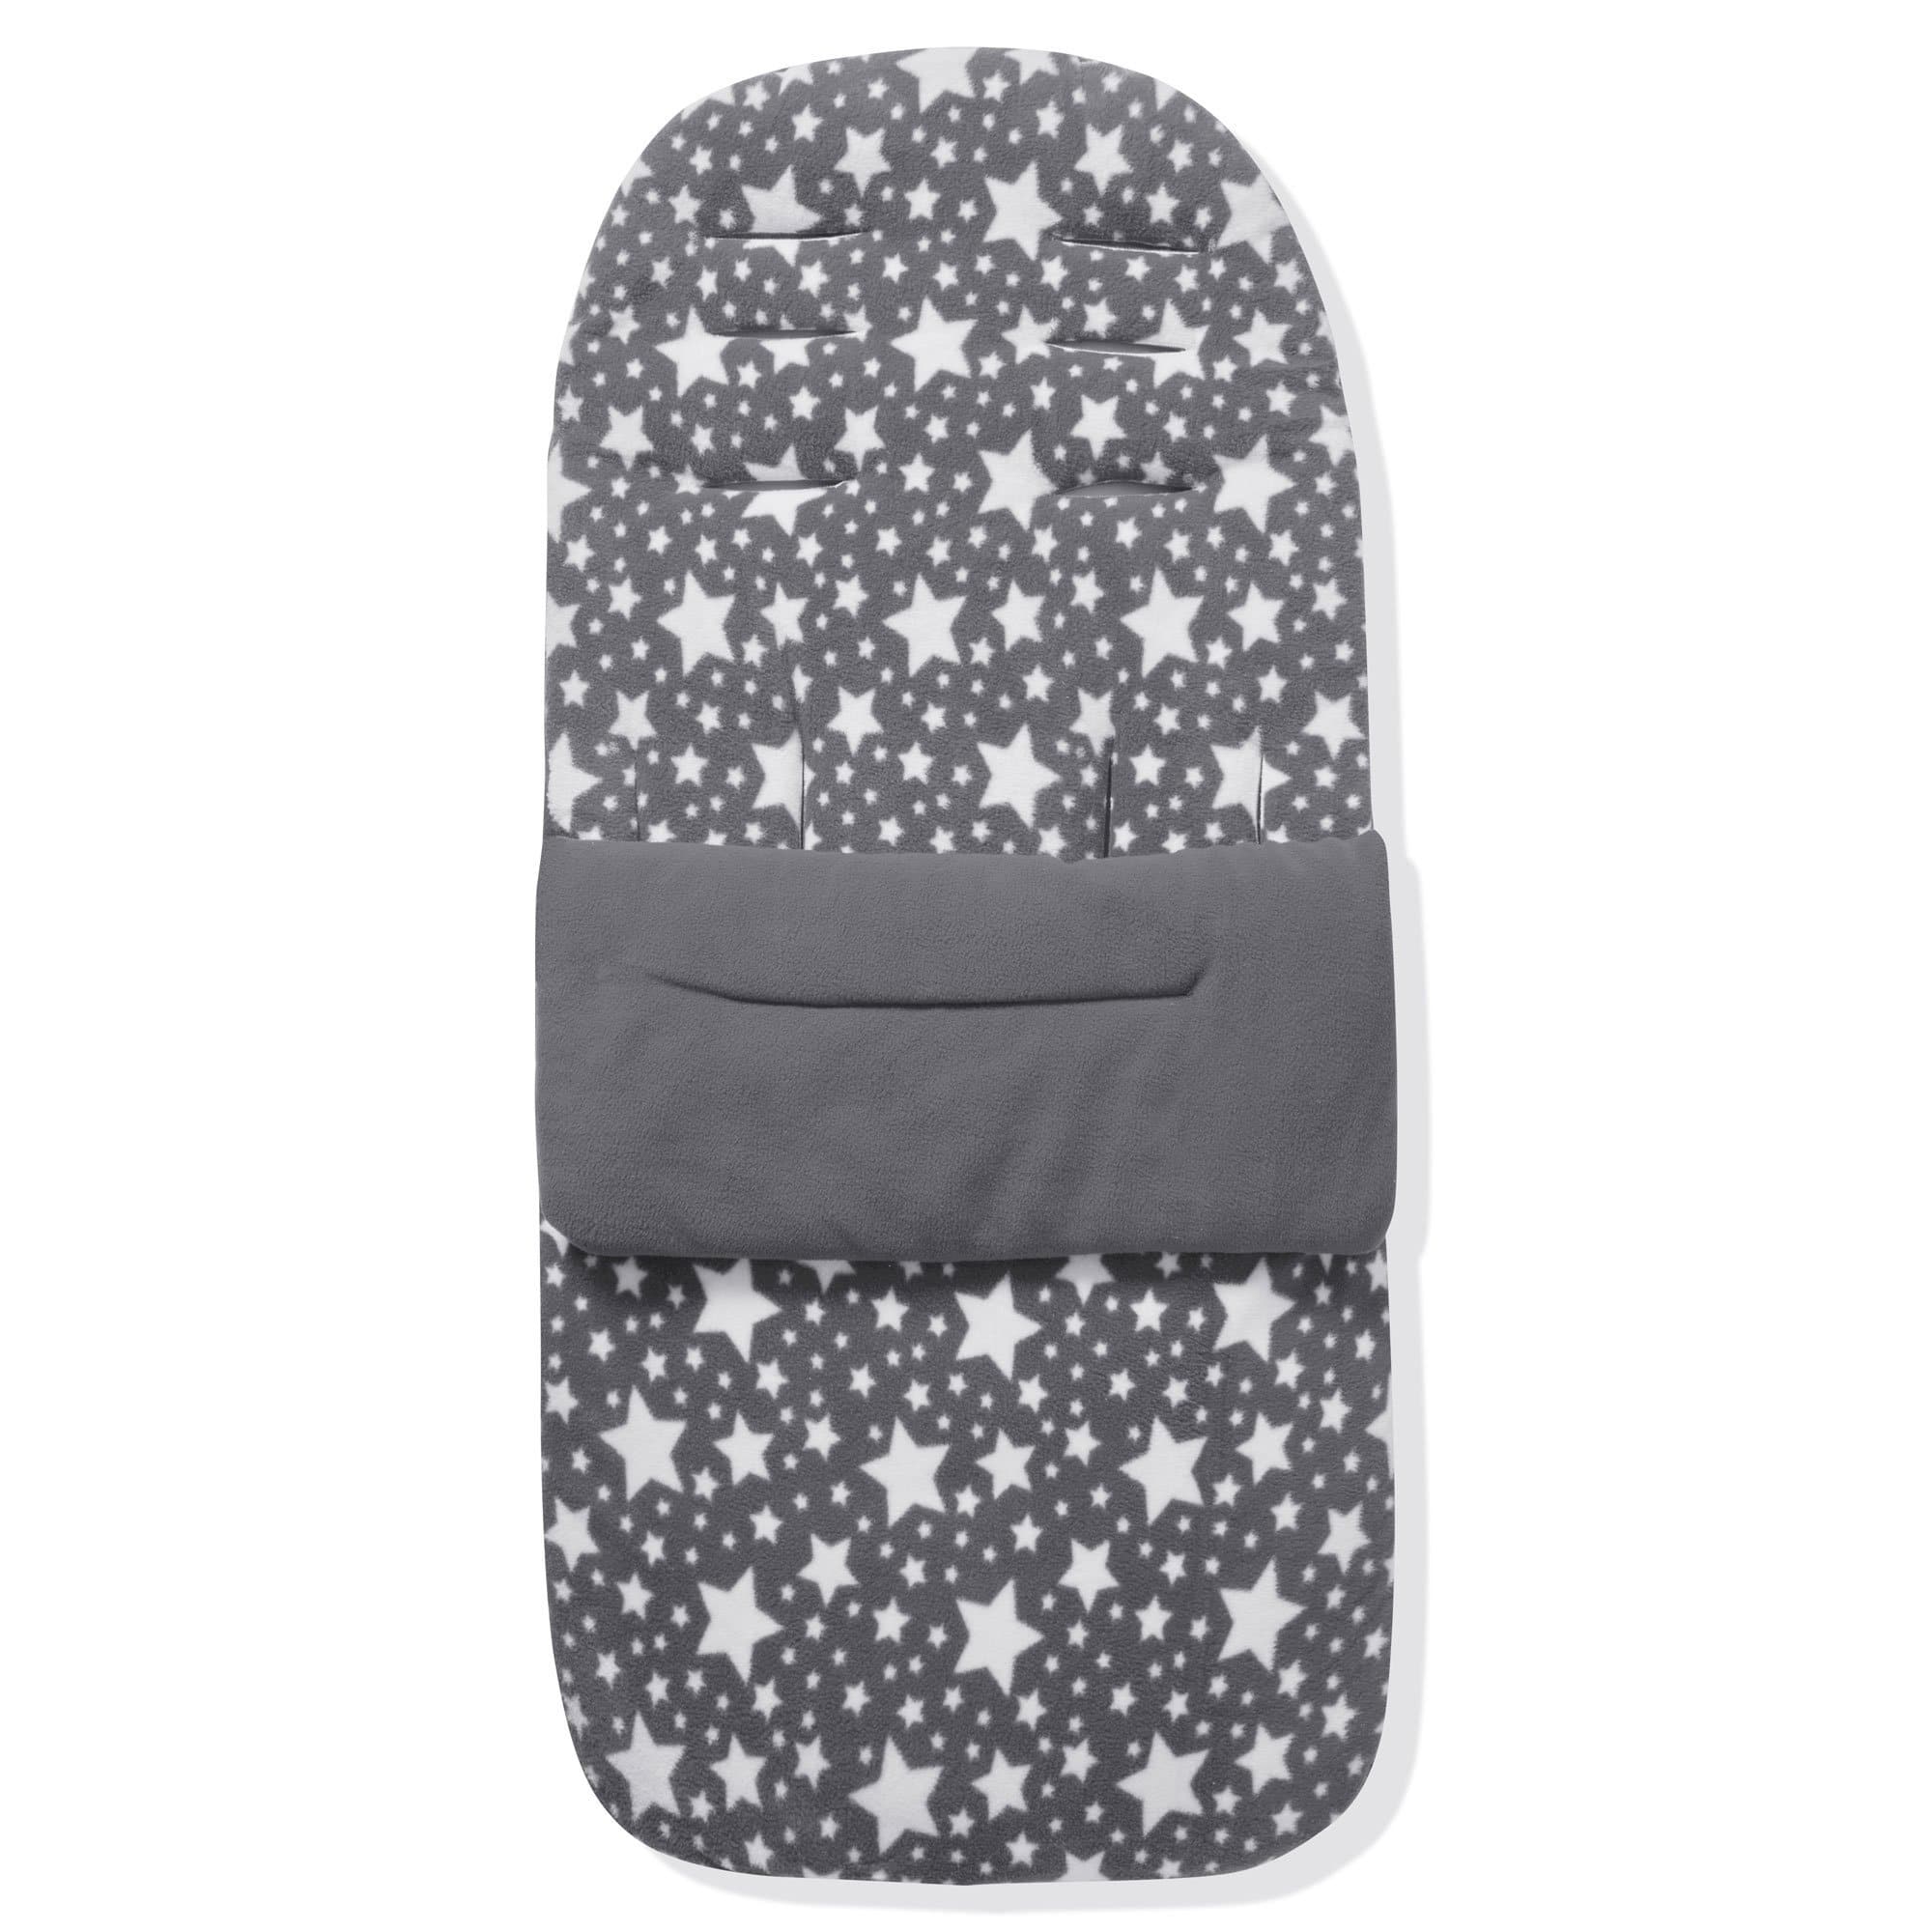 Fleece Footmuff / Cosy Toes Compatible with I'coo - Grey Star / Fits All Models | For Your Little One